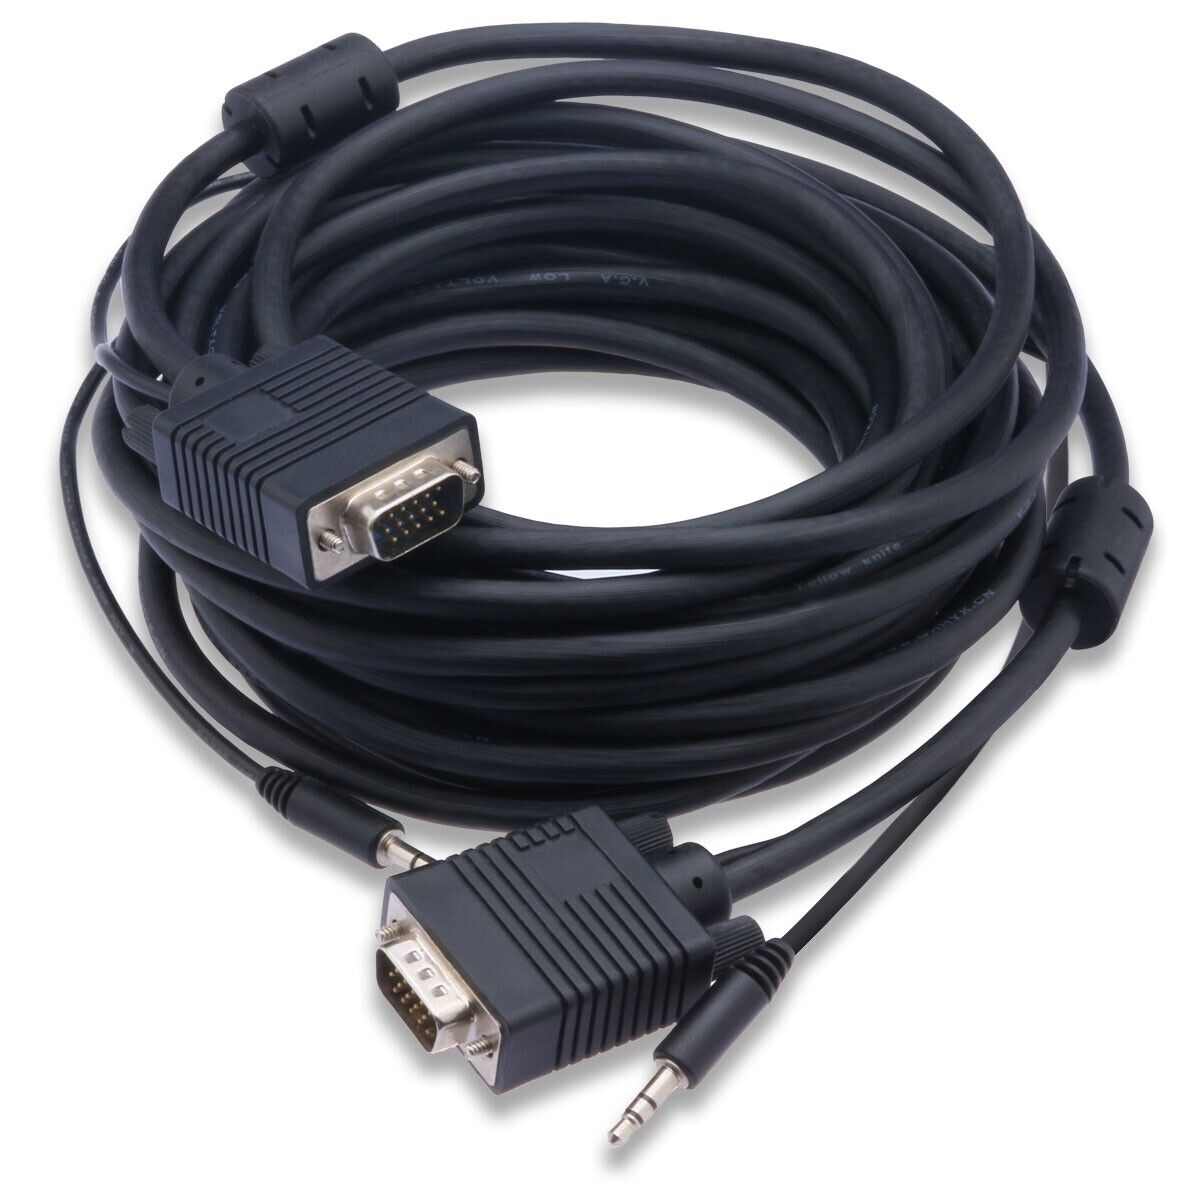 Long VGA to VGA Cable 25 feet Male to Male Cord 1080p High Resolution for PC